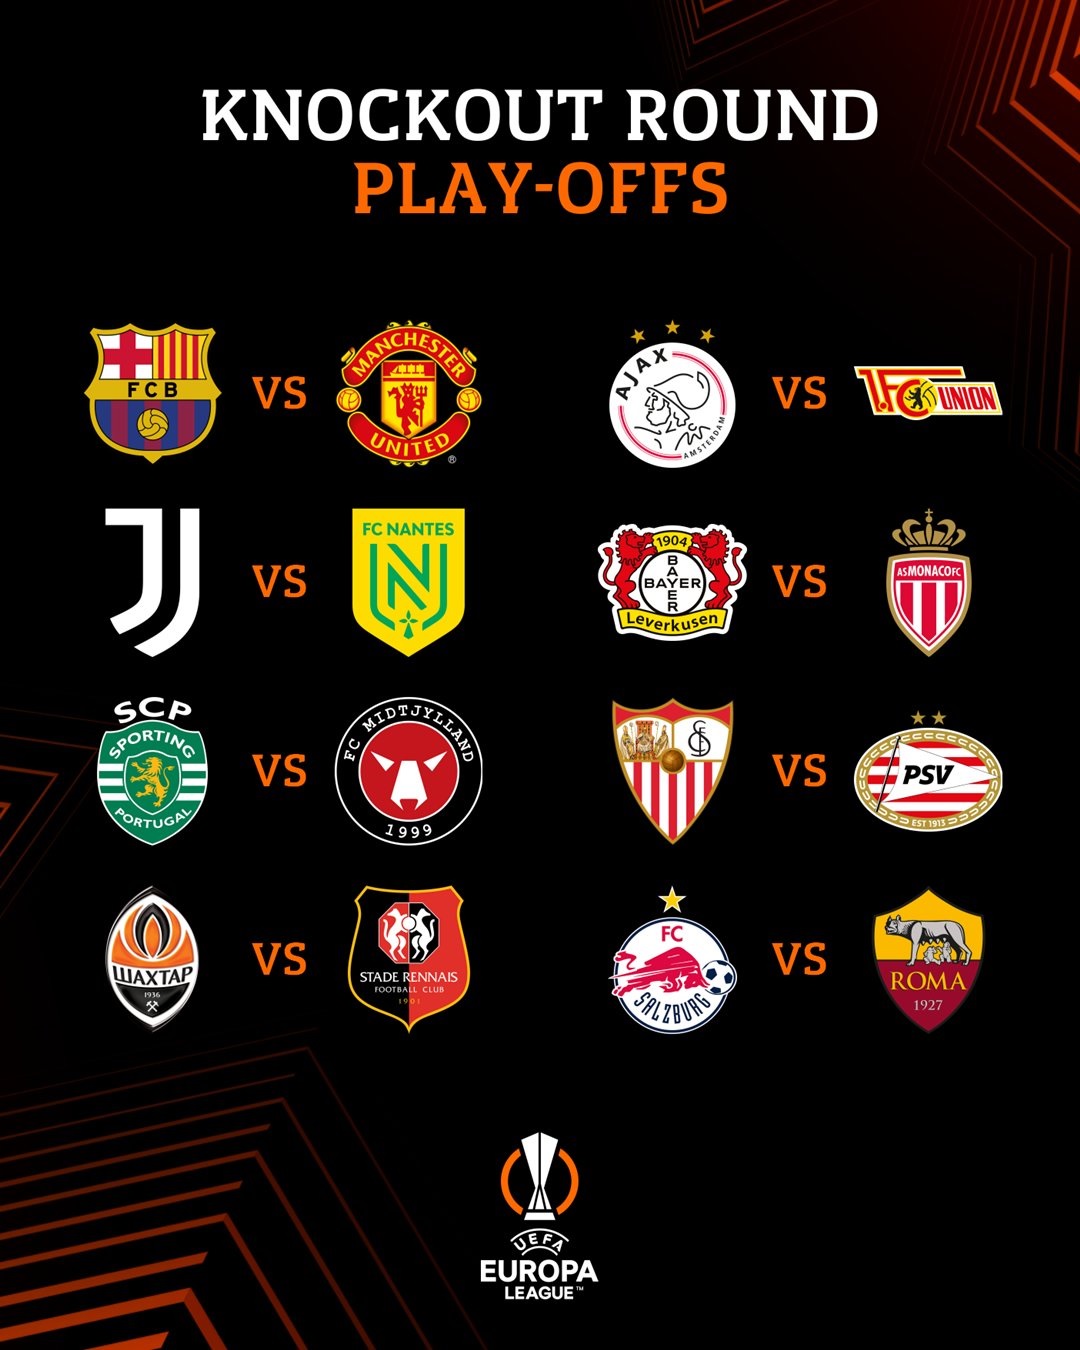 Europa League playoffs draw results: Matches, teams qualified, seeds, rules  for Round of 16 qualifiers | Sporting News